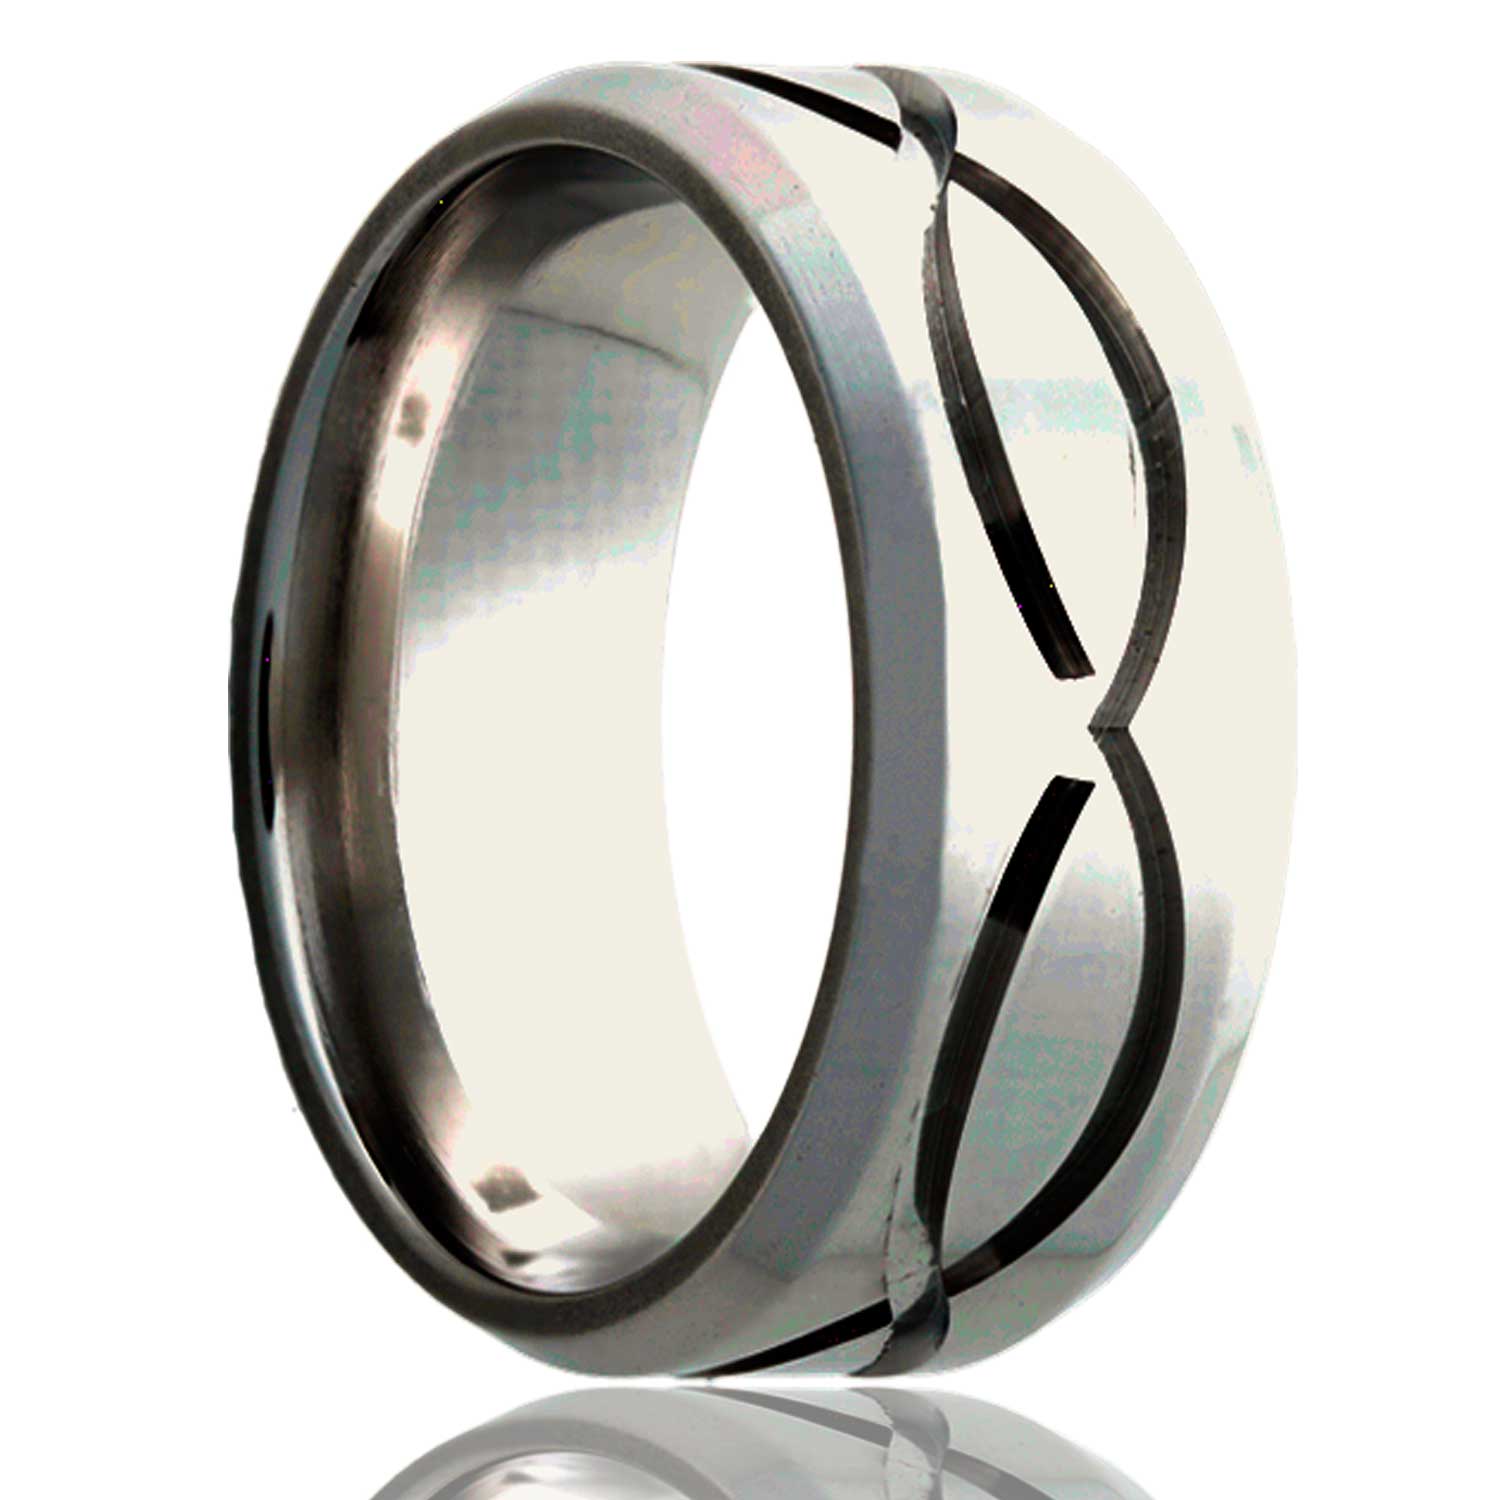 A infinity waves cobalt wedding band with beveled edges displayed on a neutral white background.